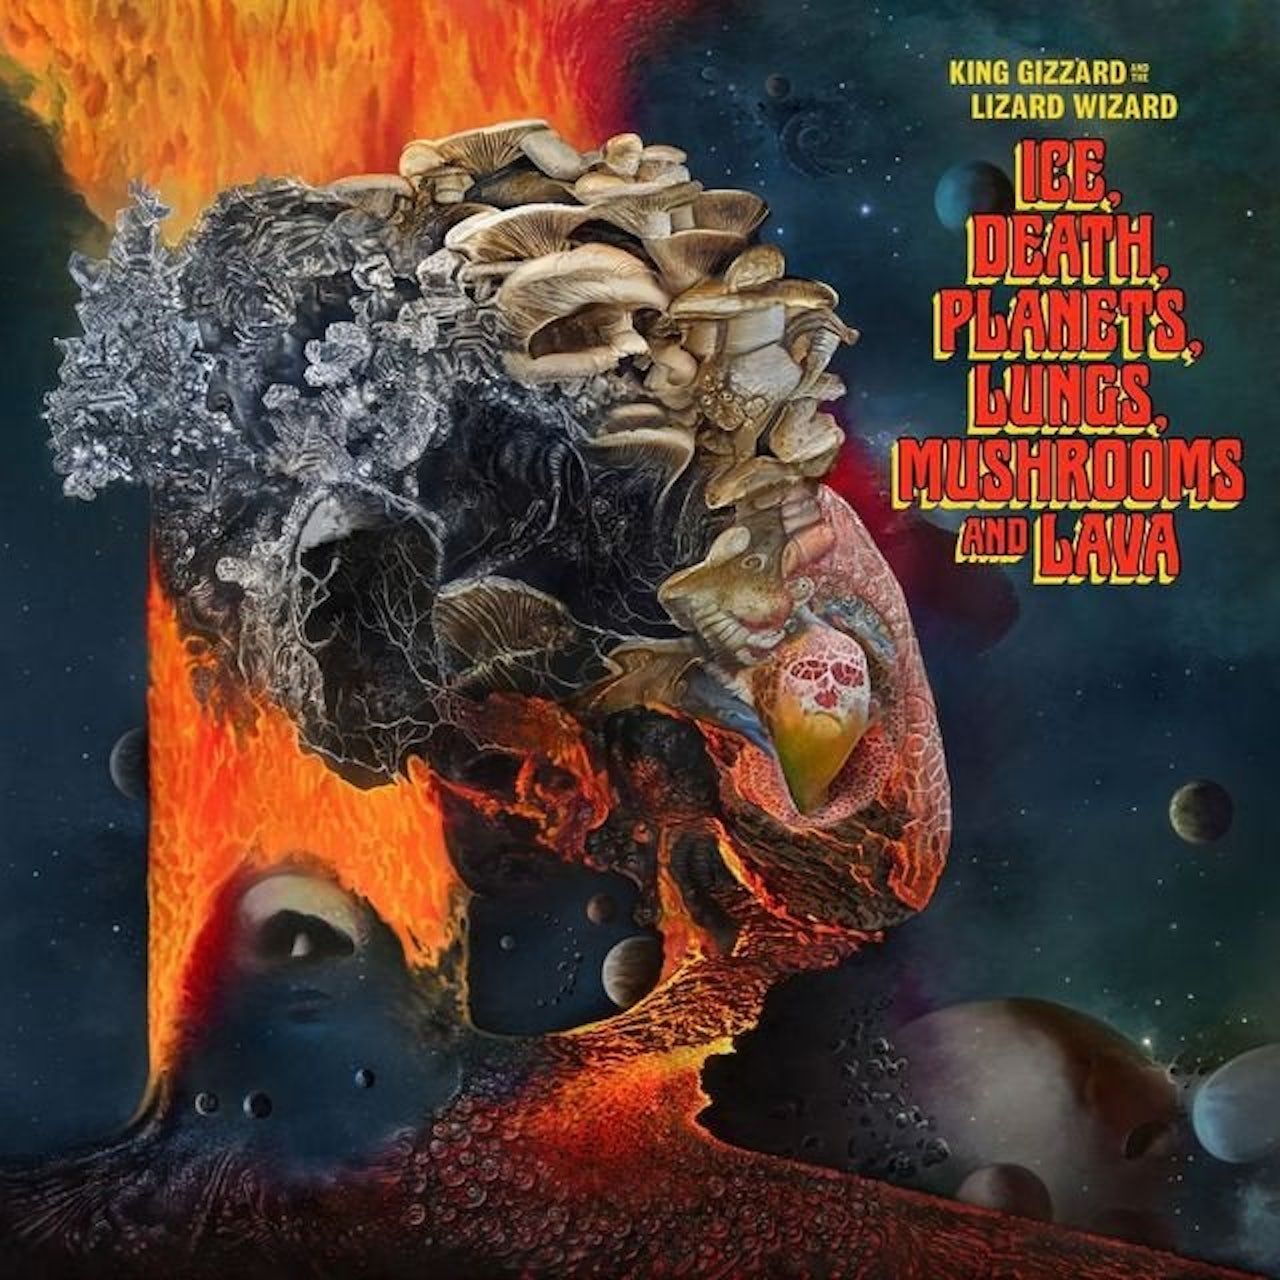 0842812170164, Виниловая пластинка King Gizzard & The Lizard Wizard, Ice, Death, Planets, Lungs, Mushroom And Lava king gizzard the lizard wizard king gizzard the lizard wizard with mild high club sketches of brunswick east colour